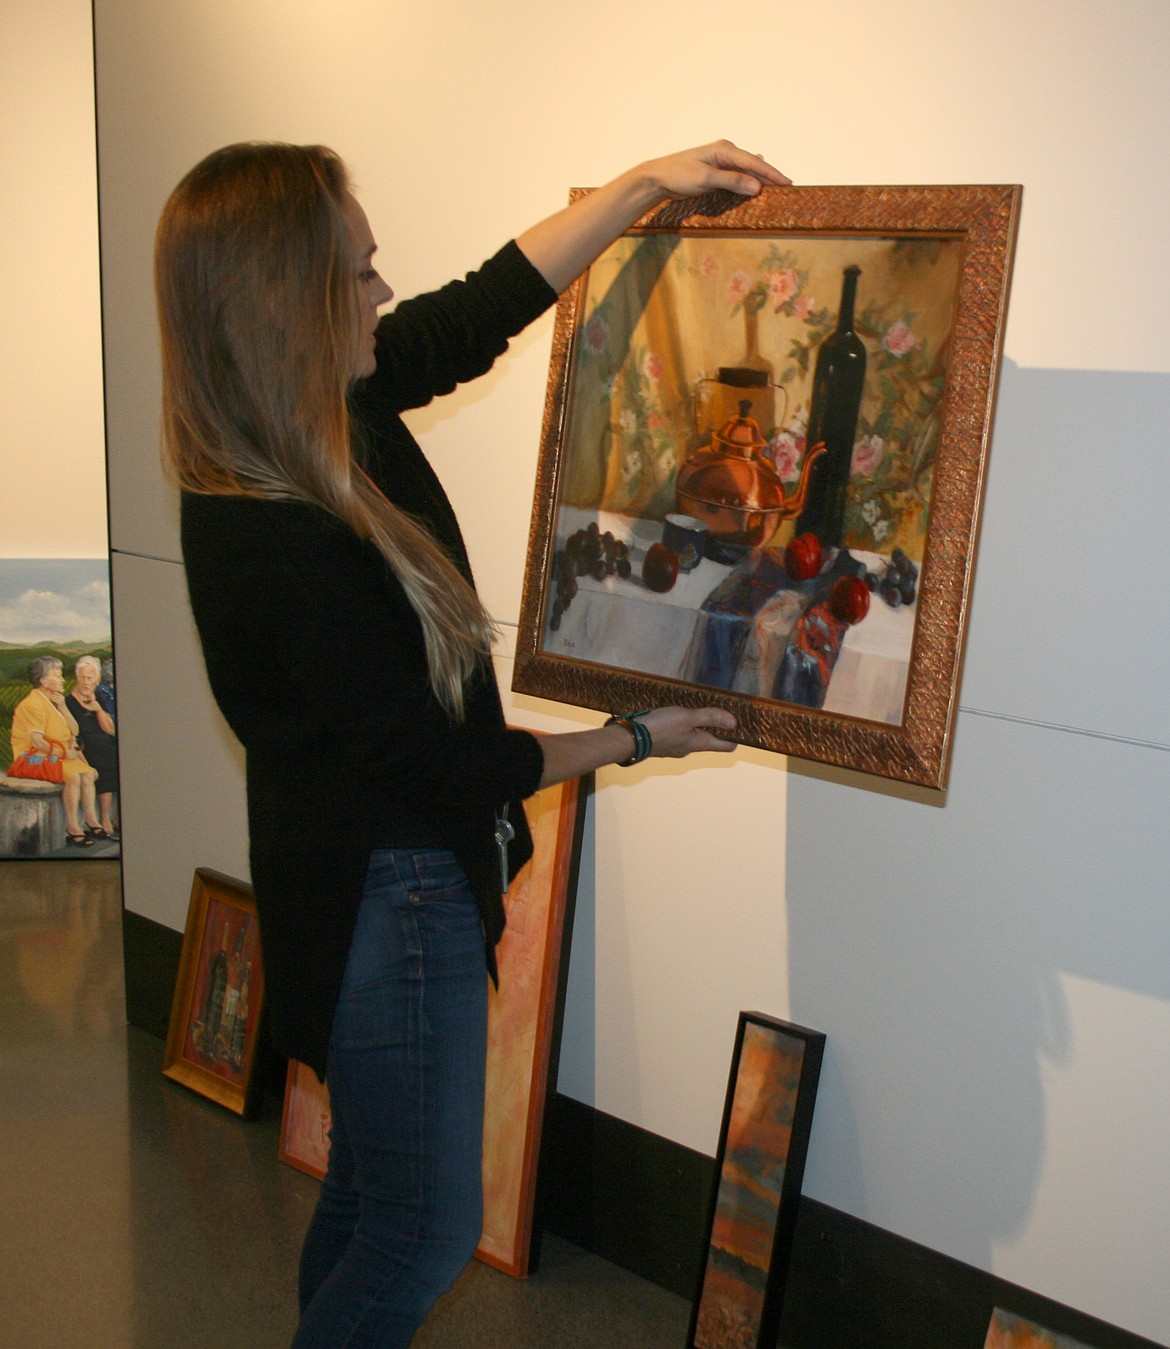 Erika Kovalenko checks her options for installation of the “Uncorked” group art show opening Friday at the Moses Lake Museum & Art Center. Kovalenko is the museum’s artistic director.